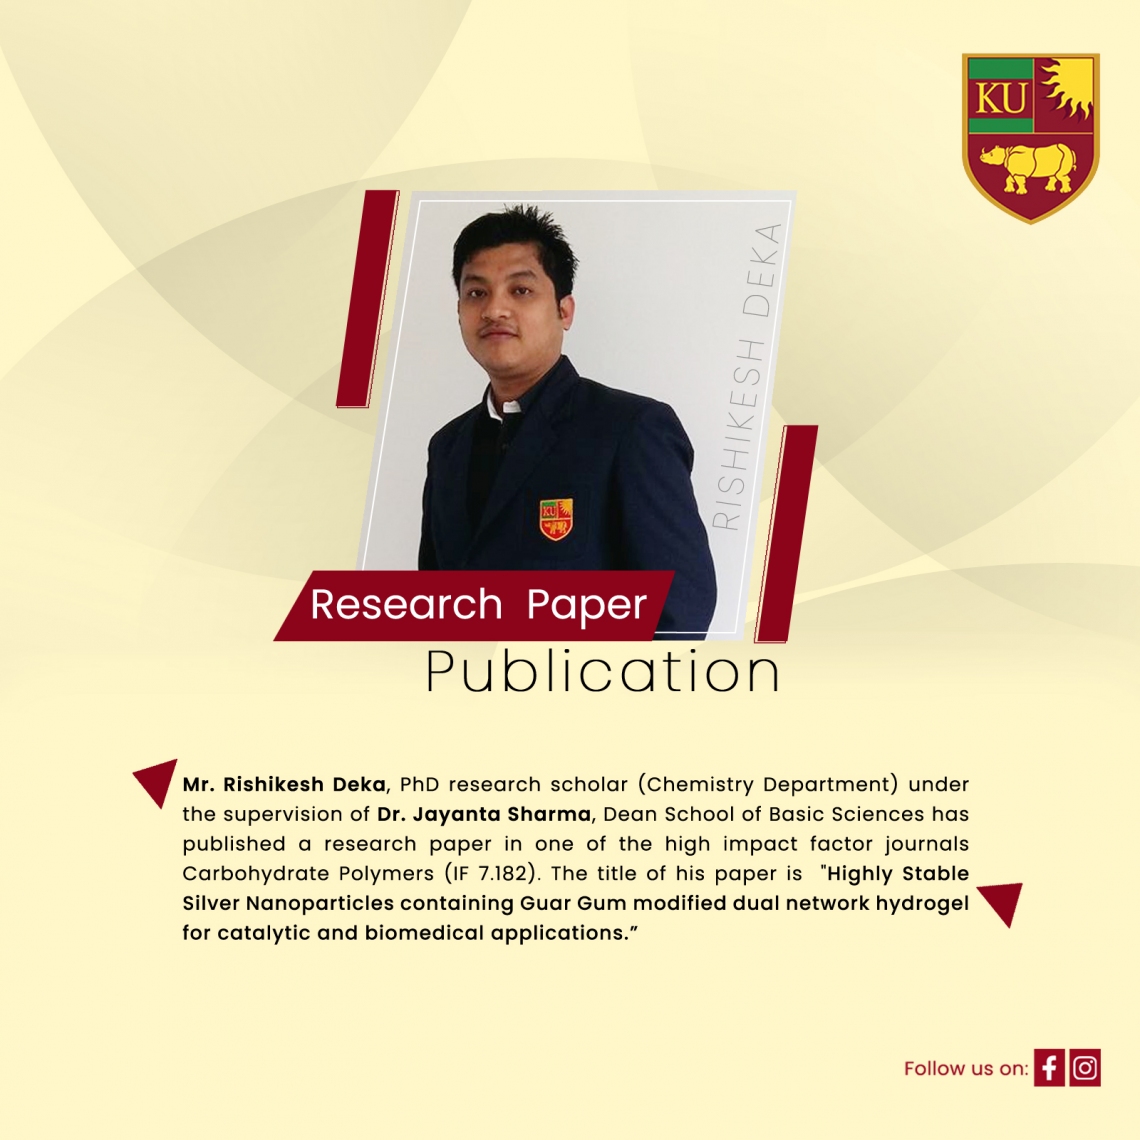 Mr. Rishikesh Deka, PhD Research Scholar(Chemistry Department) for successfully publishing a Research Paper